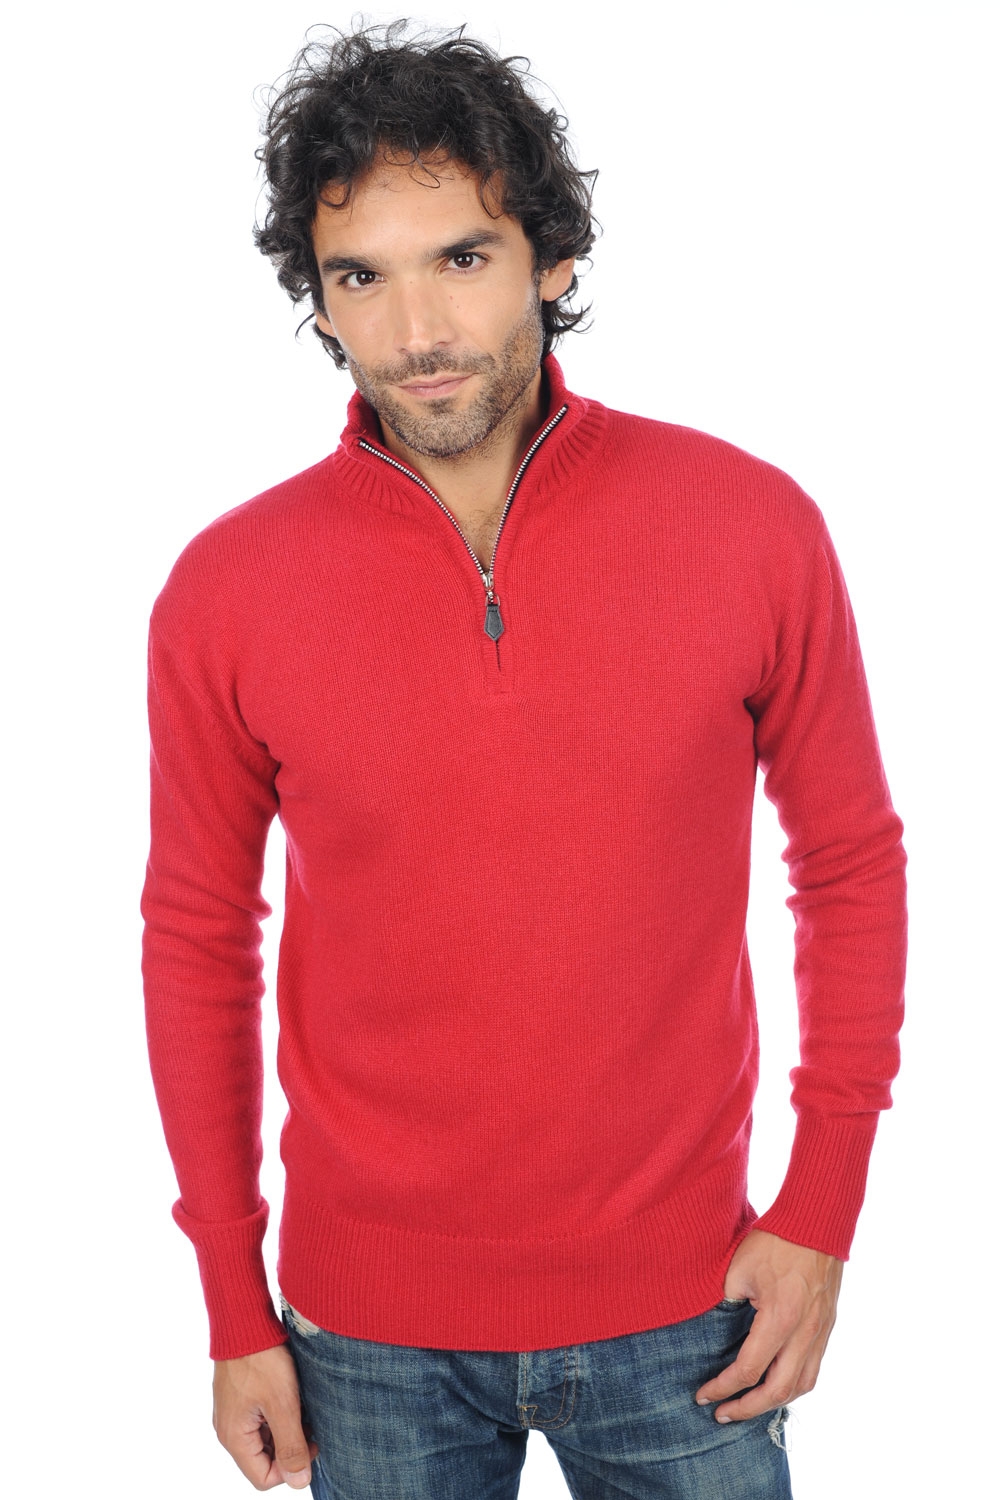 Cashmere men polo style sweaters donovan blood red 4xl